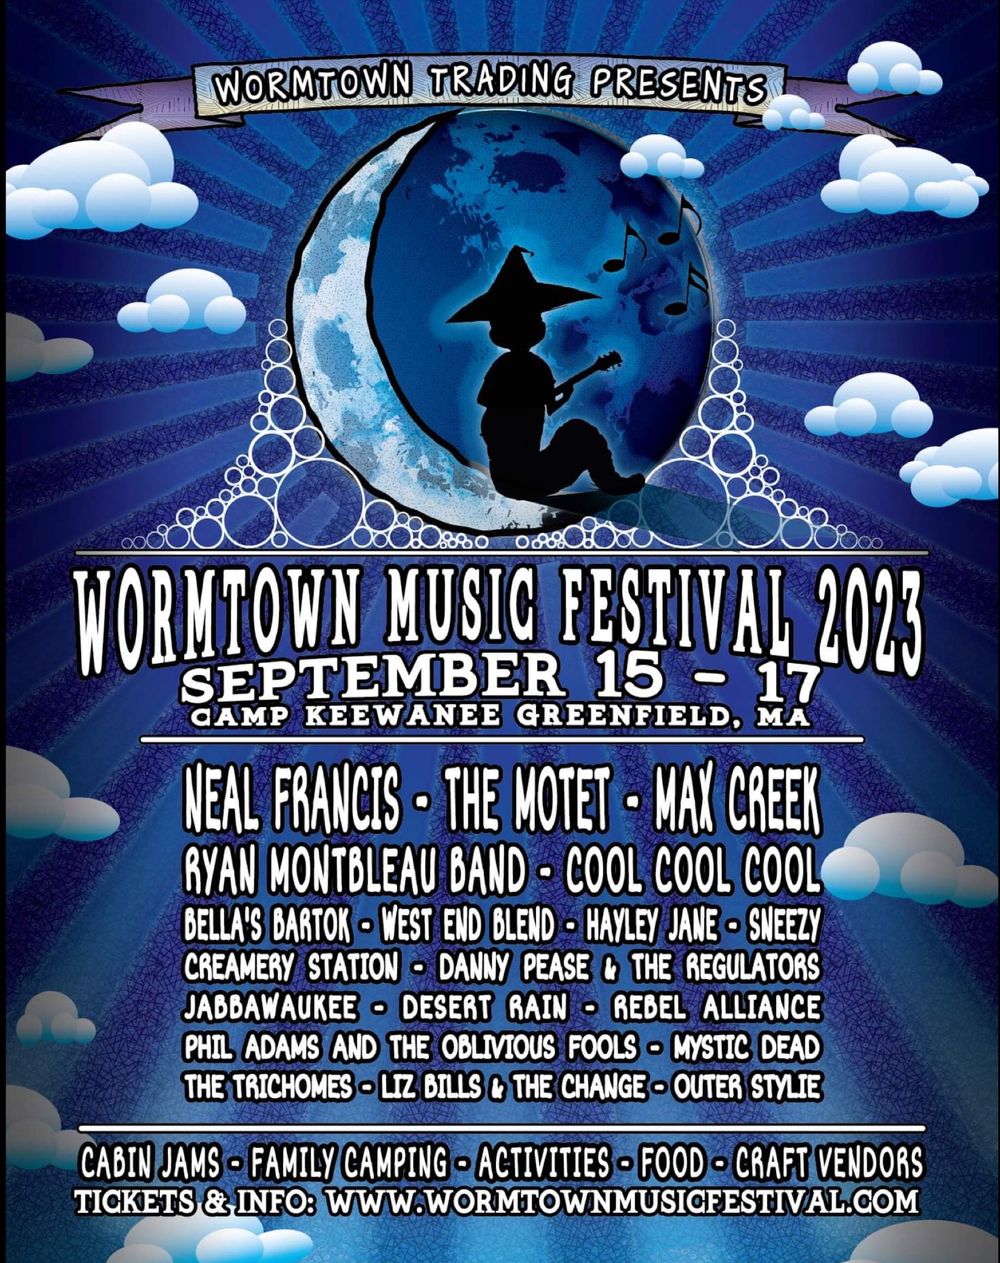 Wormtown Music Festival September 15-17 Cool Cool Cool